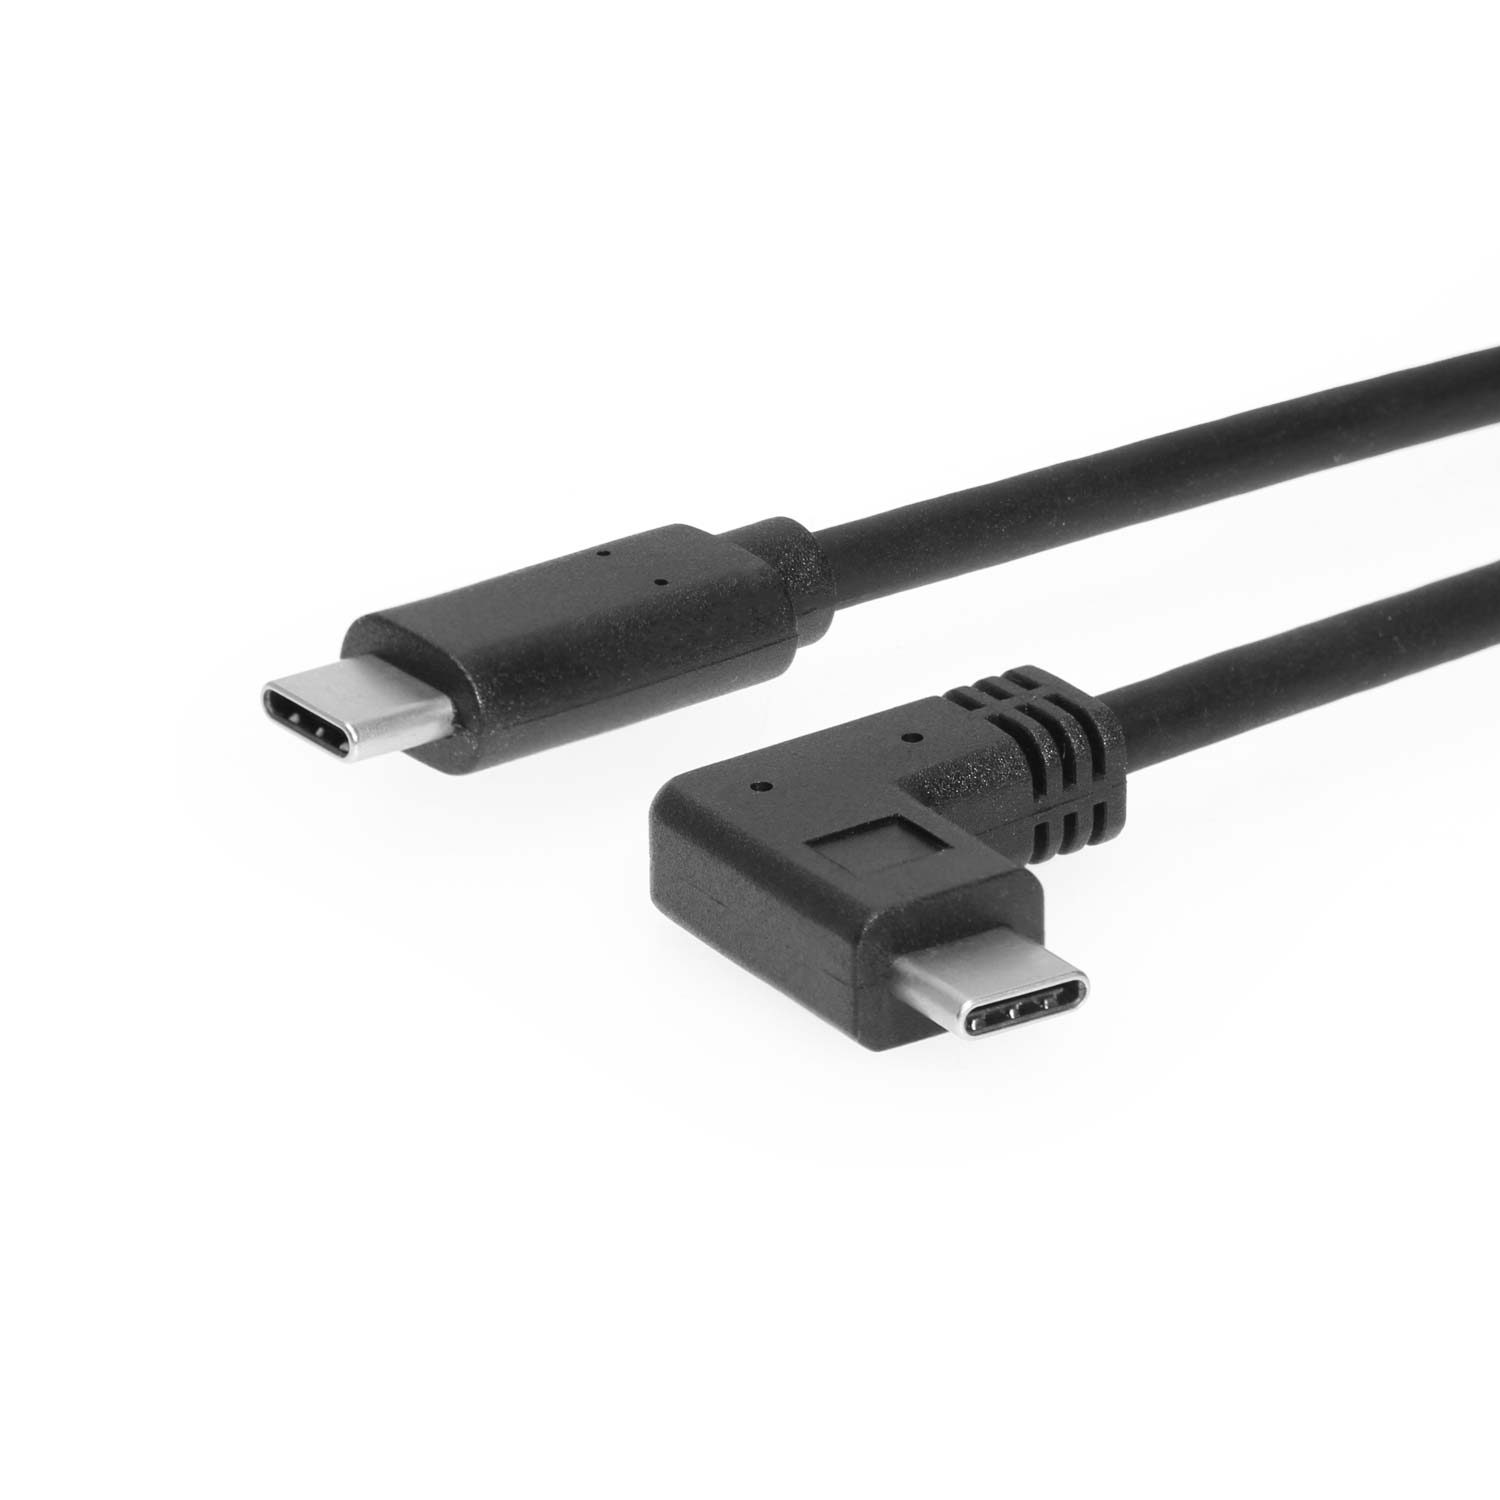 8in. USB 3.2 Gen 2 Type-C Male to Female High Quality Panel Mount Cable